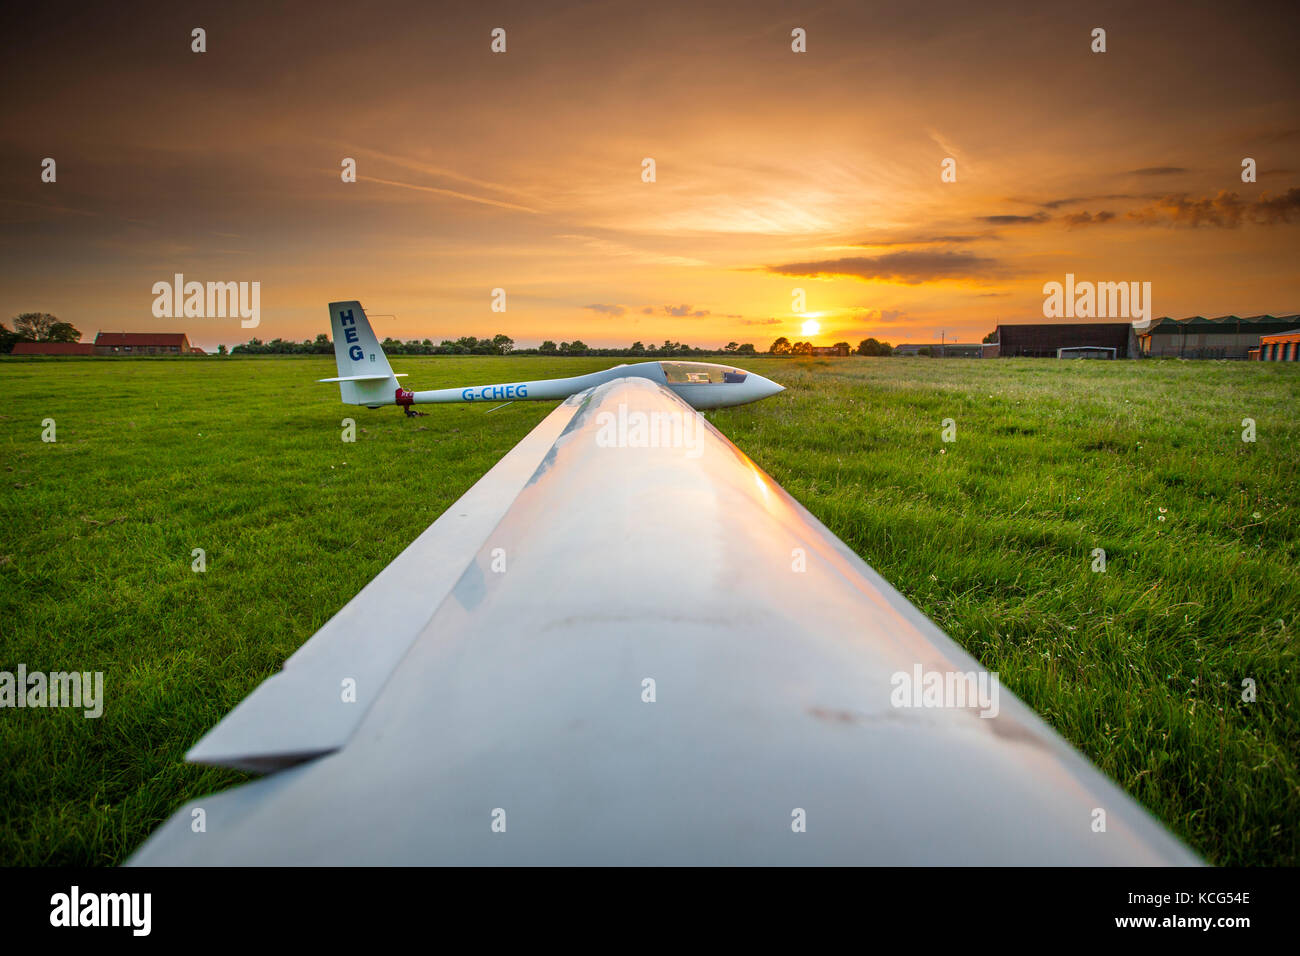 View of an Elan DG-500 Trainer, registration G-CHEG, single seat glider with setting sun at Kirton in Lindsey Airfield, Lincolnshire, UK Stock Photo